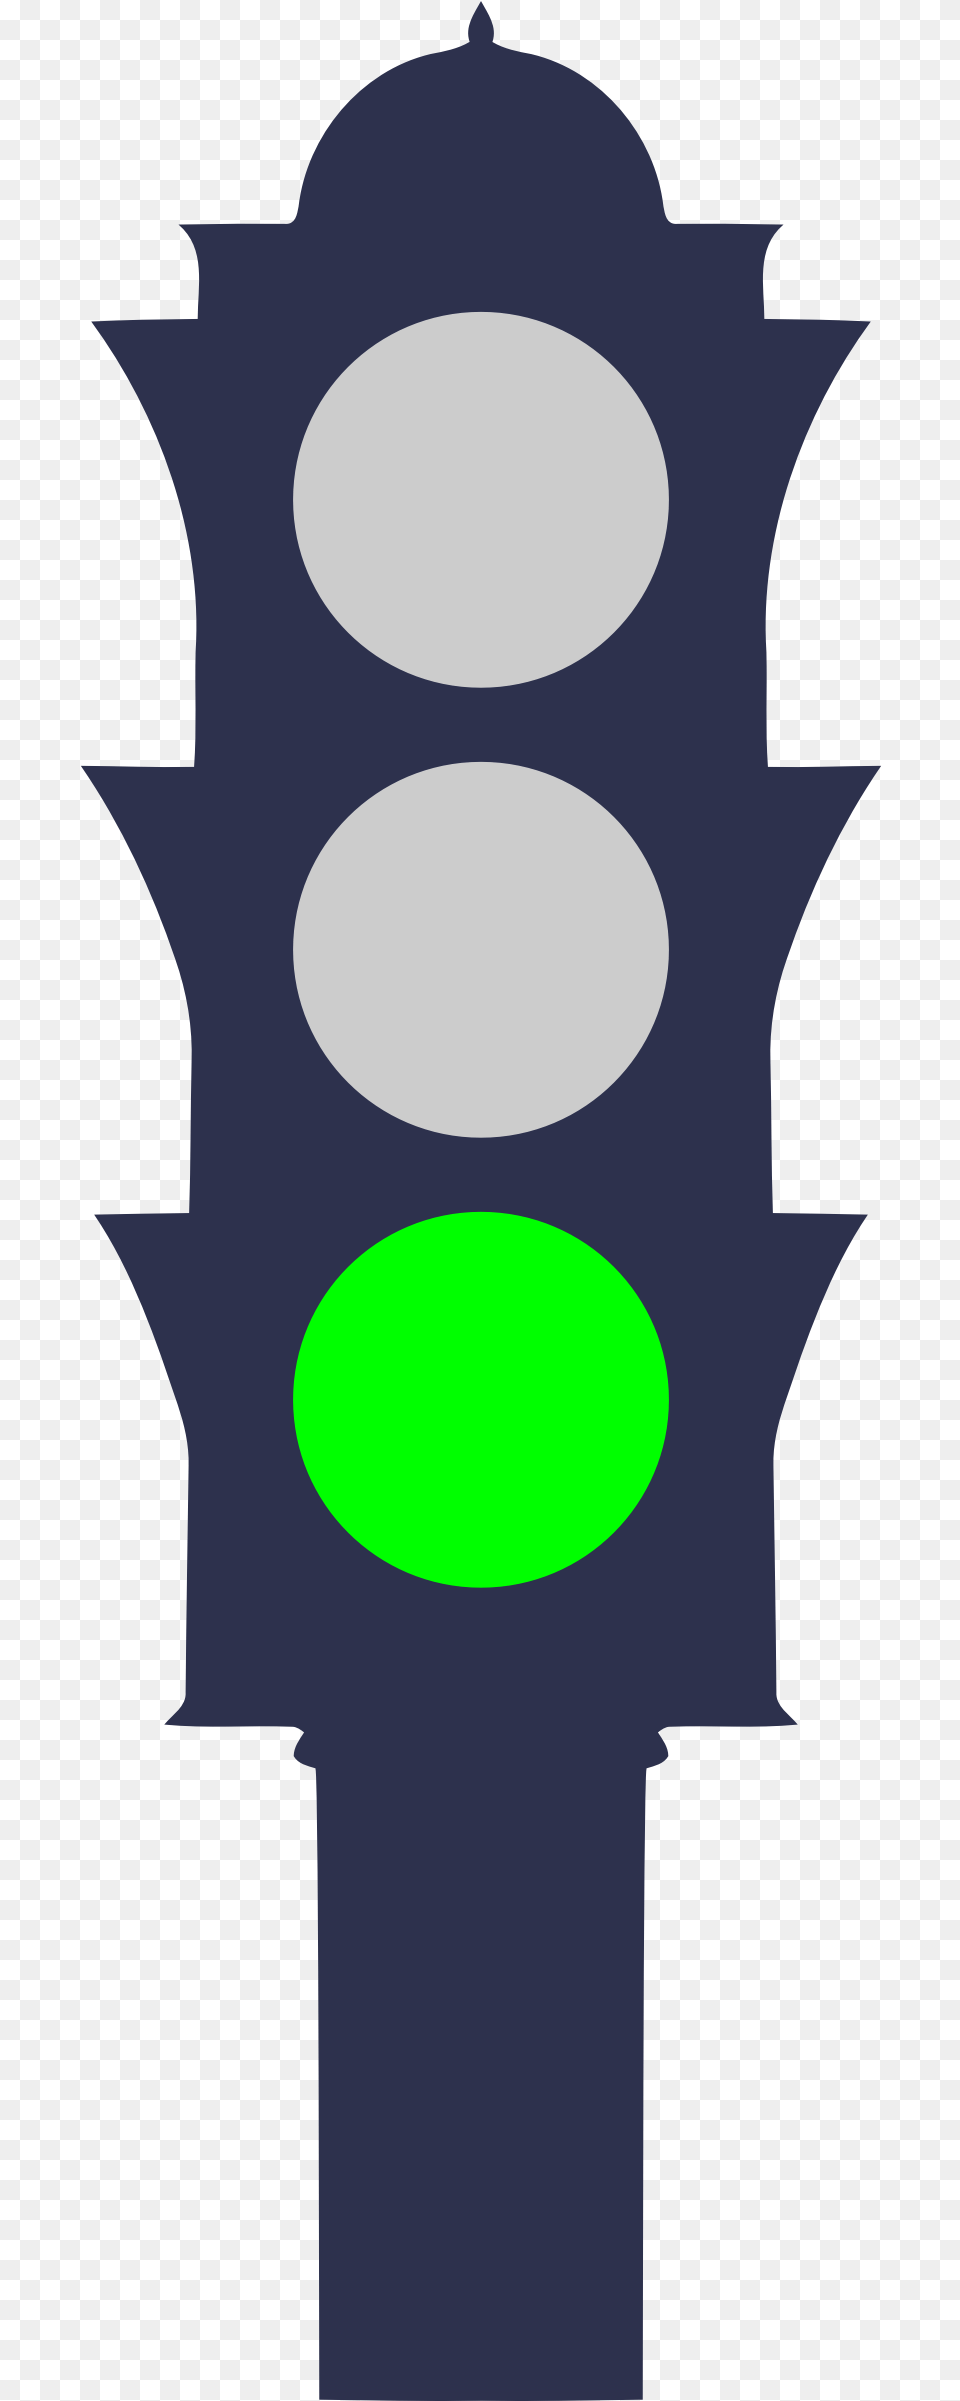 Traffic Light Icon Clipart Green Traffic Light Clip Art Transparent Green Light Clipart, Traffic Light Free Png Download